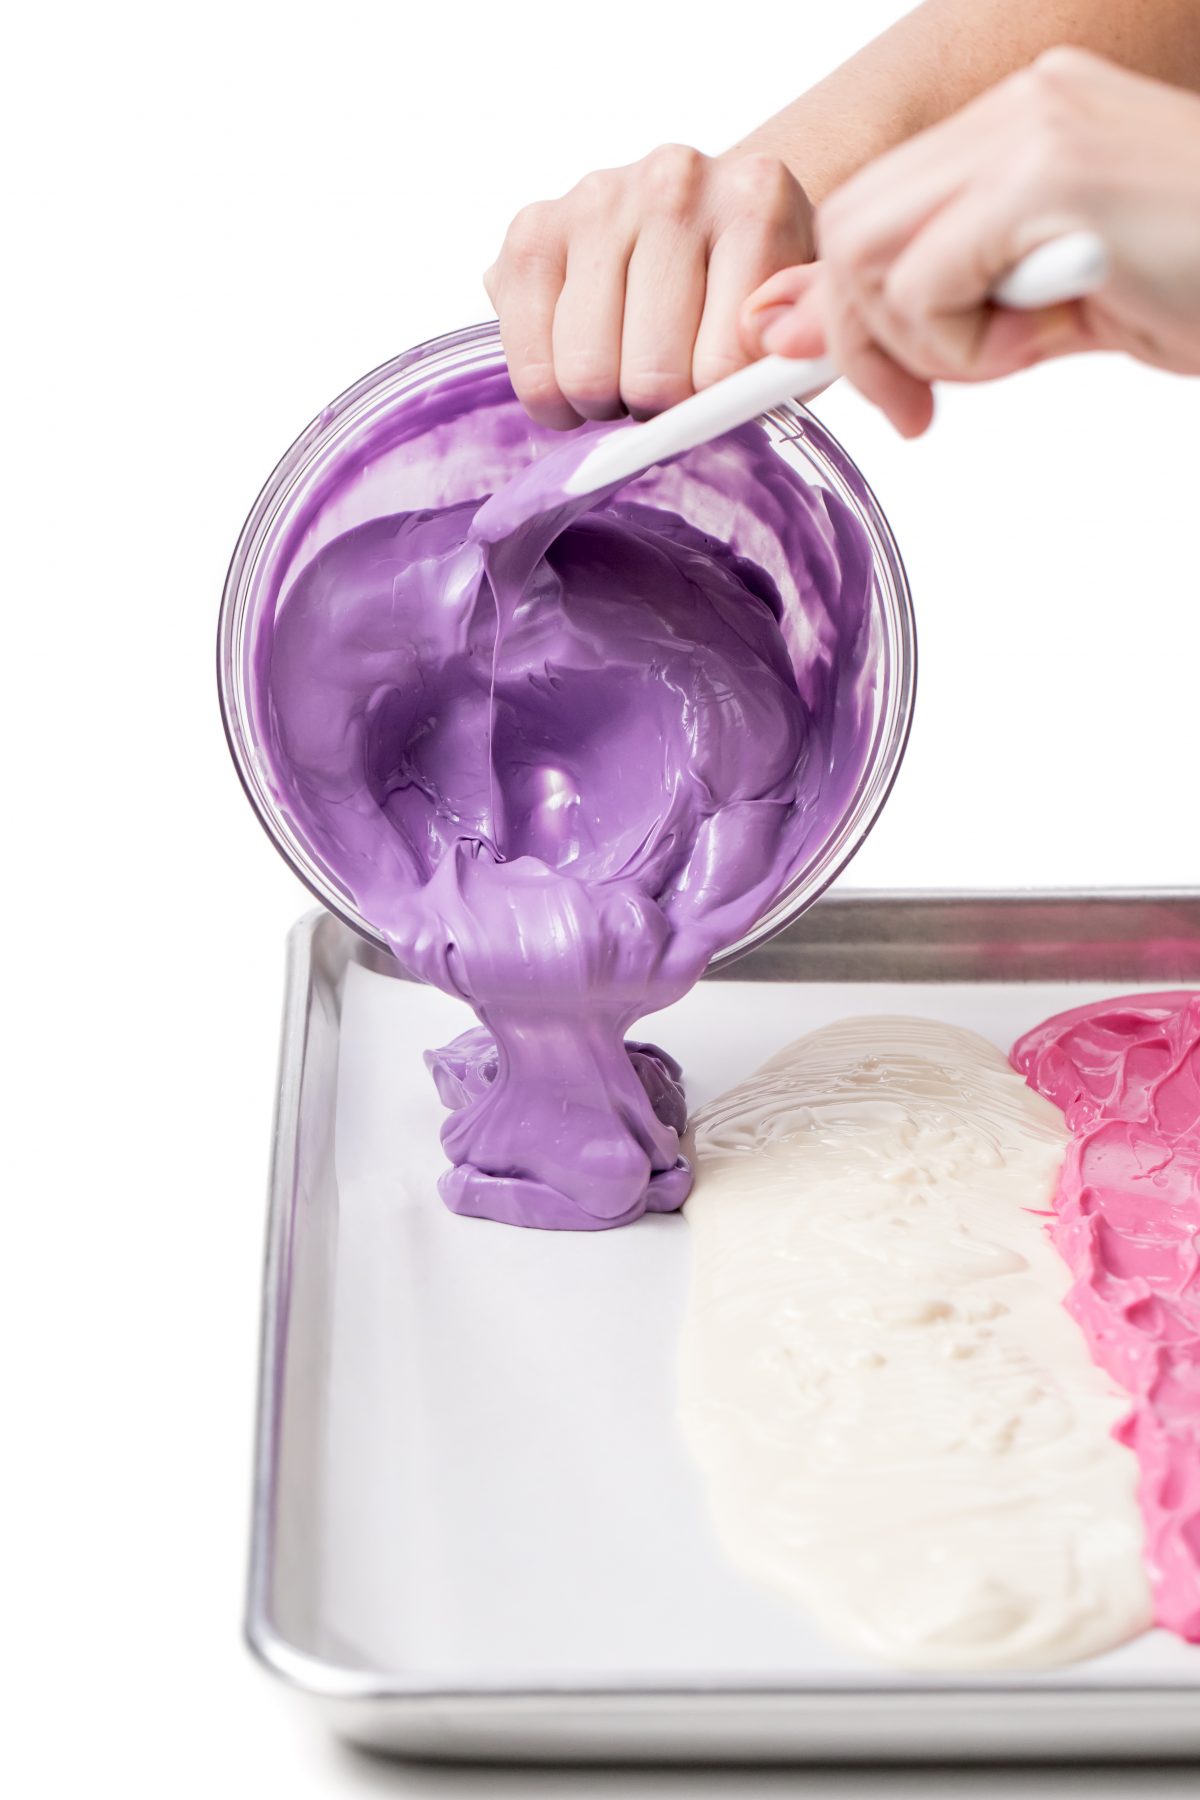 Finish pouring purple melted candy onto pan